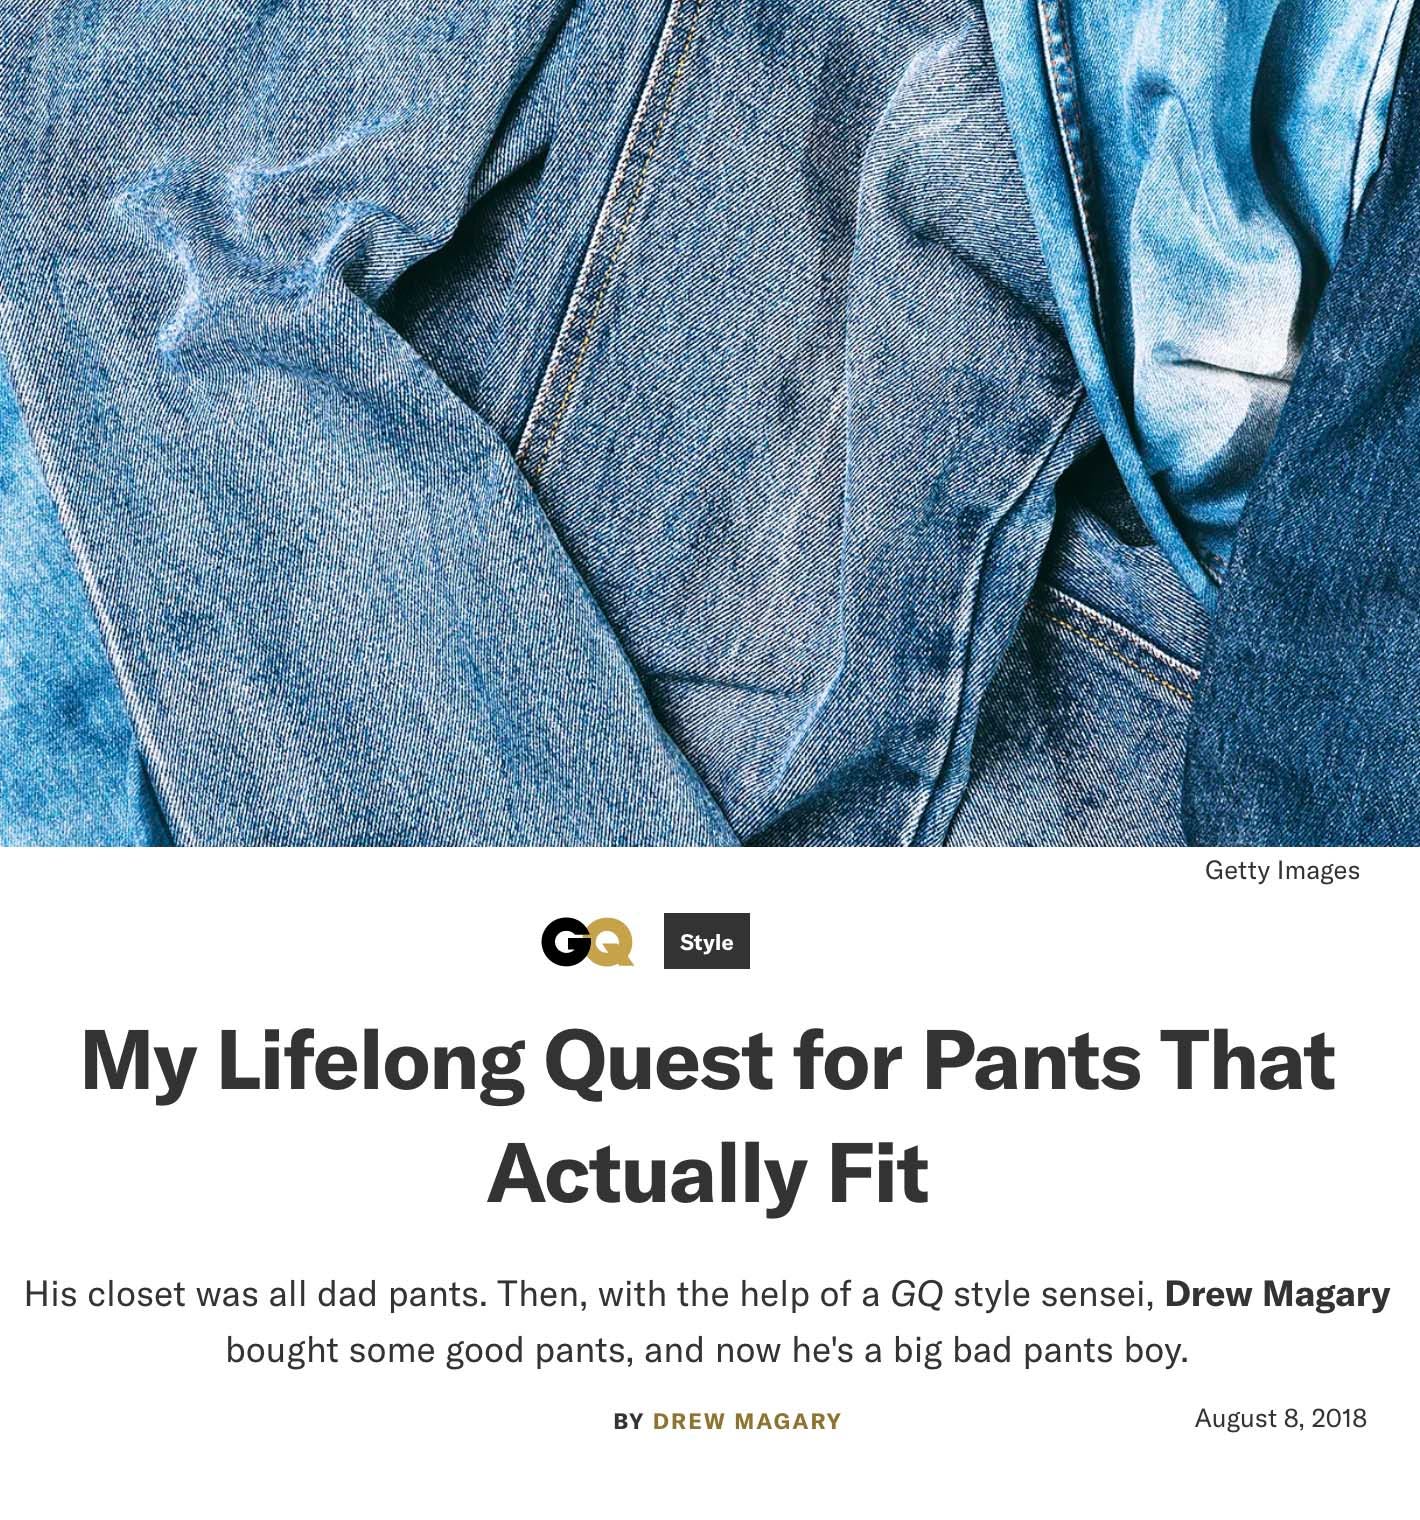 My Lifelong Quest for Pants That Actually Fit